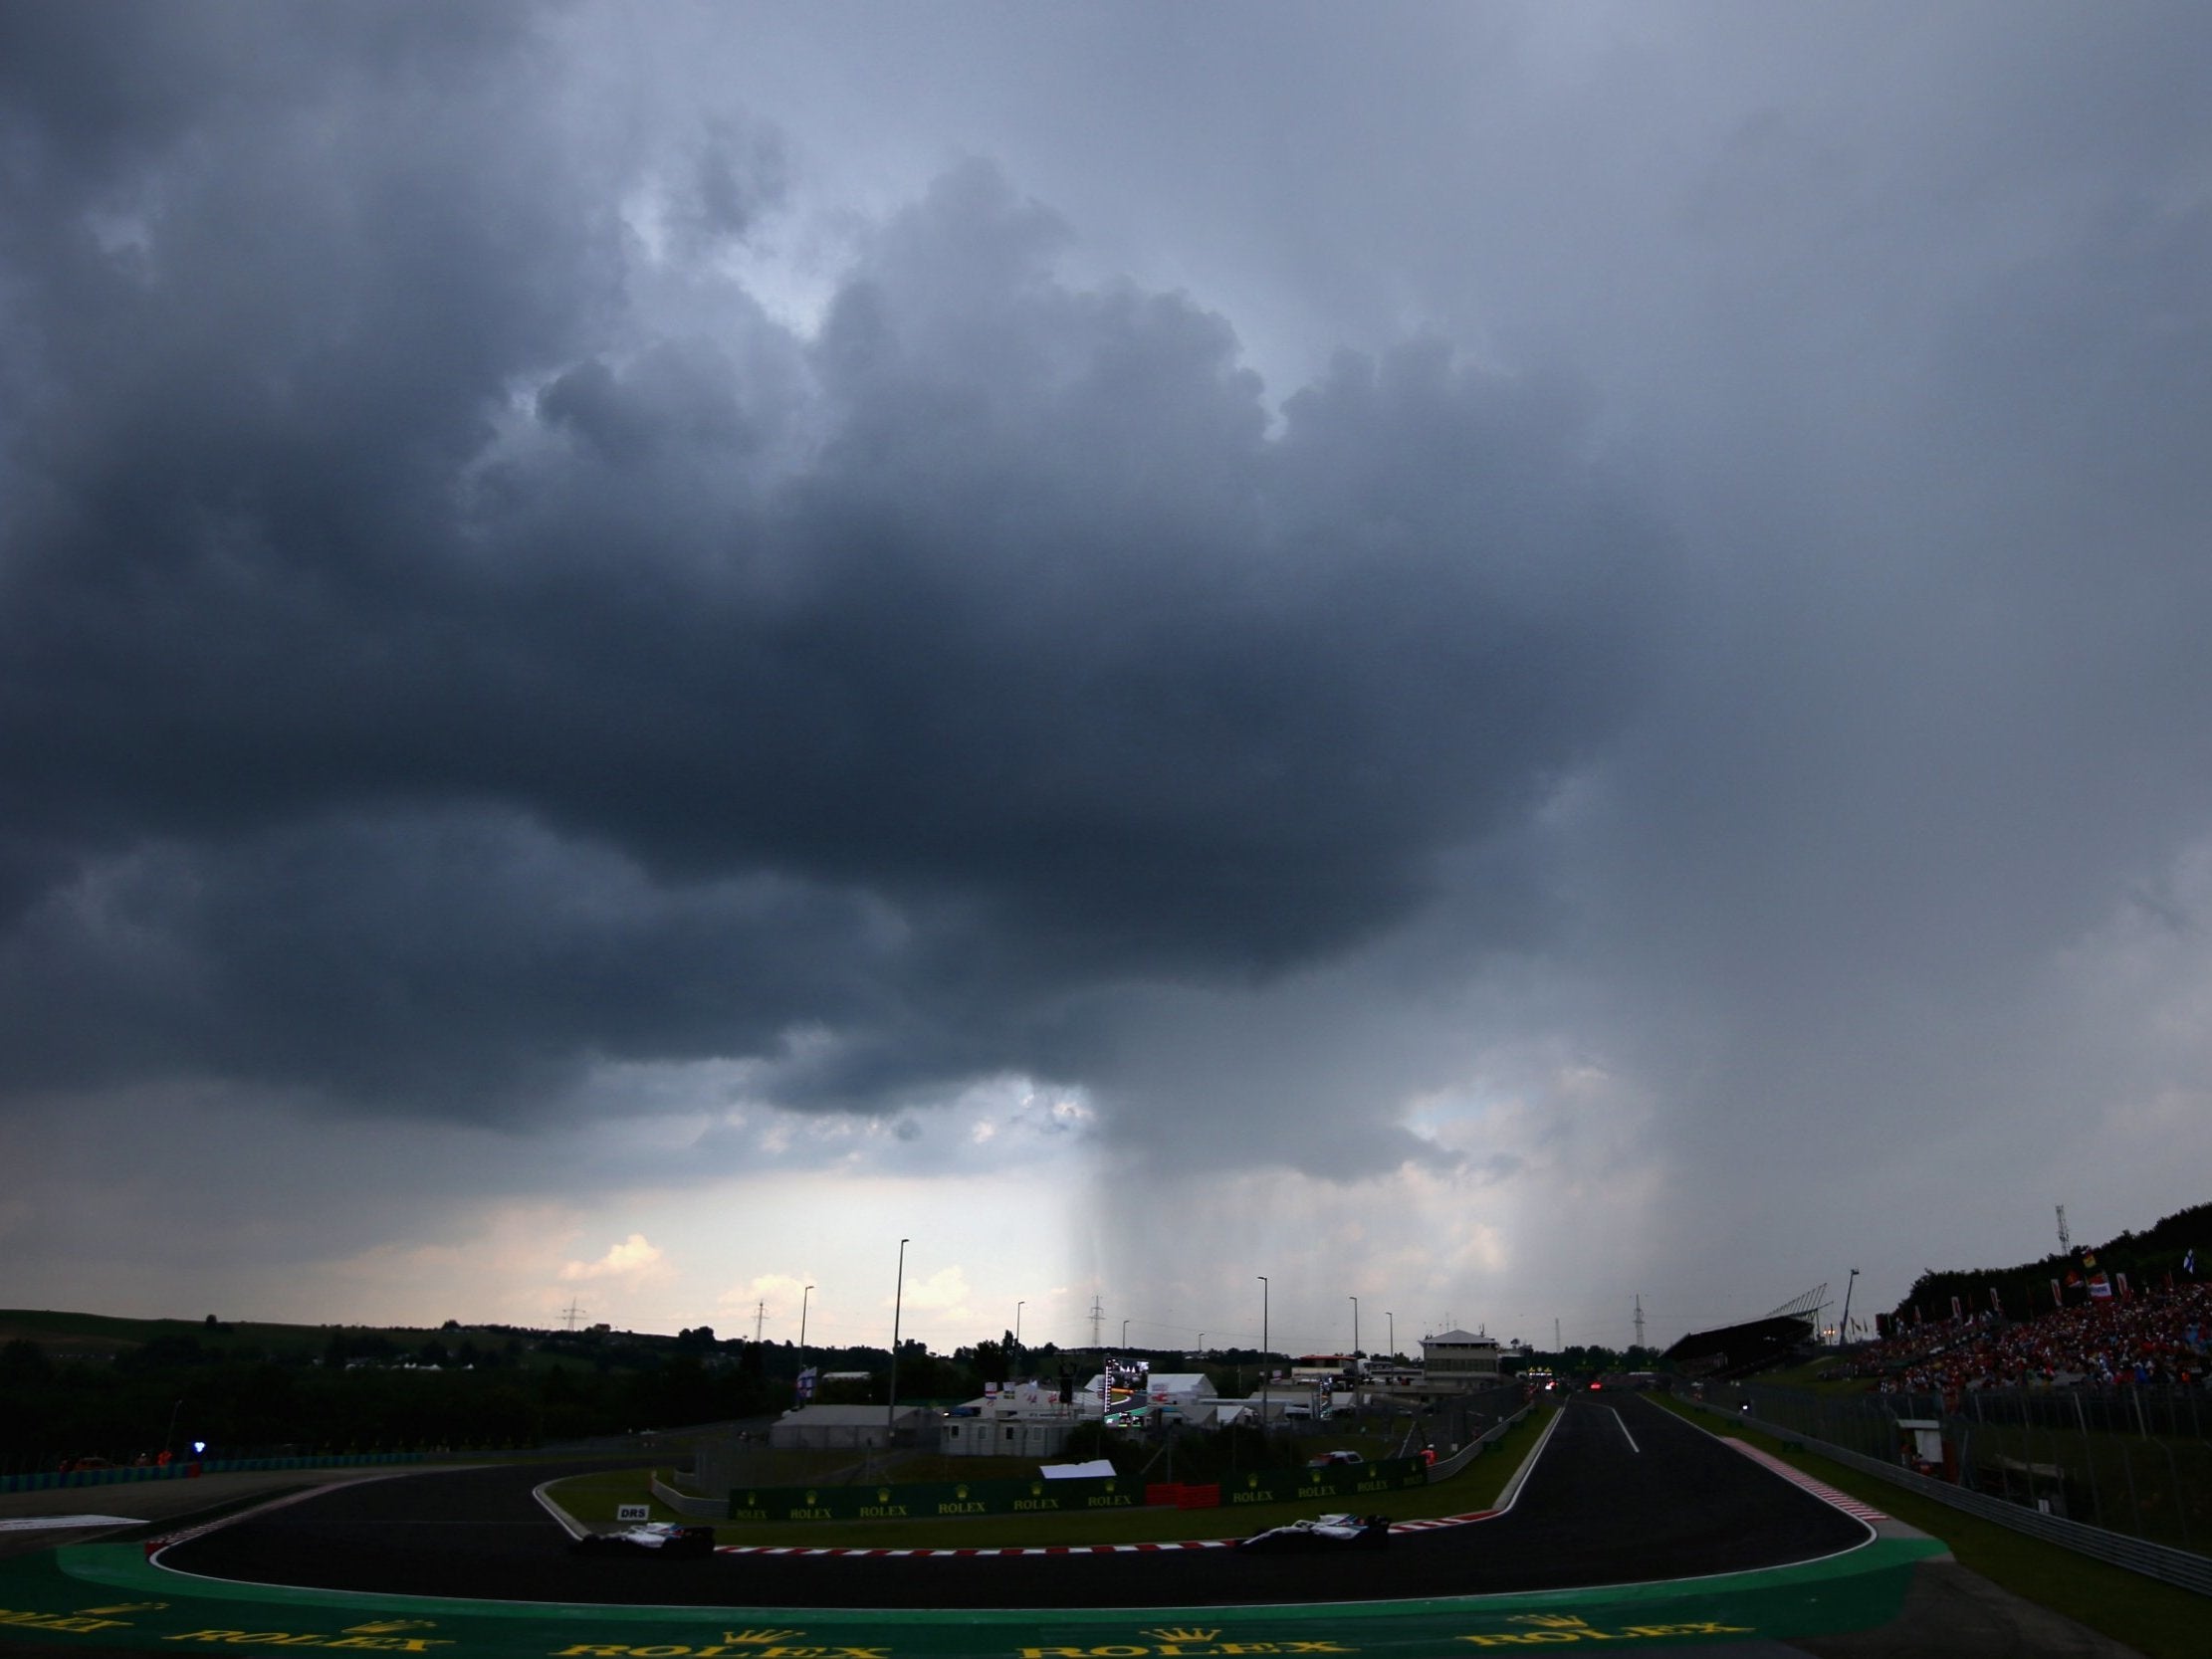 Two thunderstorms hit the Hungaroring before and during qualifying